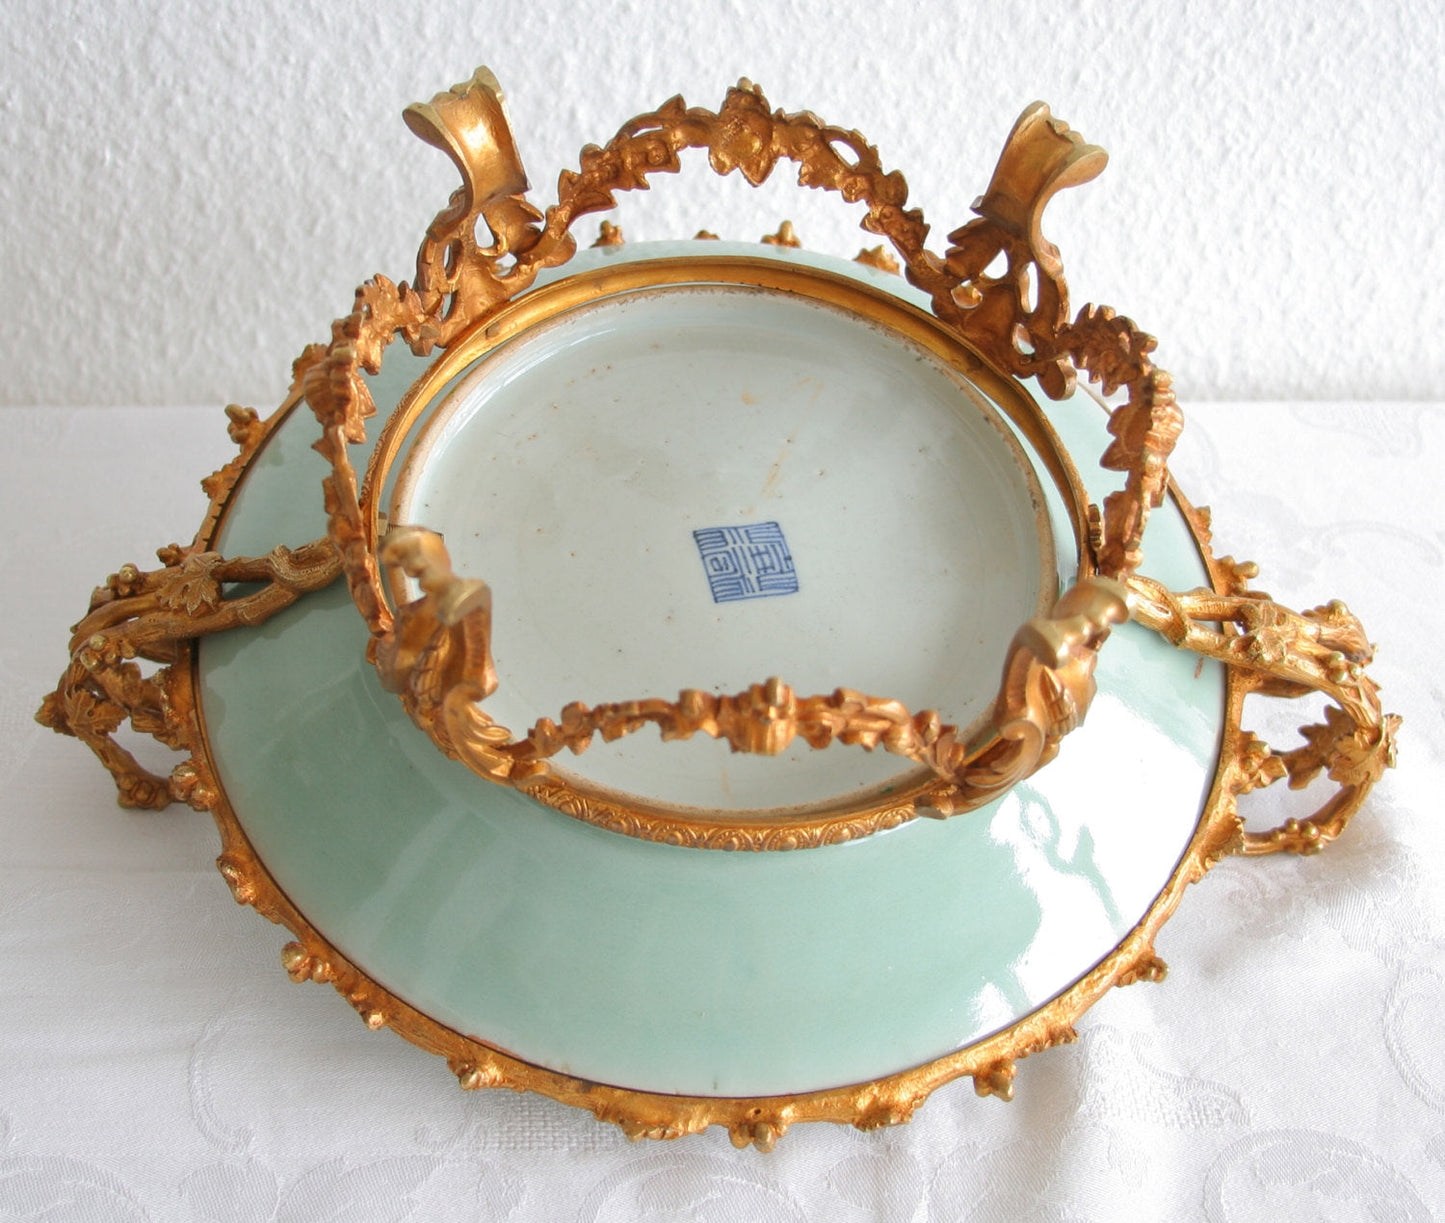 Chinese 19thC Famille Rose Celadon Ground Dish (probably Tongzhi period) in French Ormolu Gilt Bronze Mounts Mollaris.com 